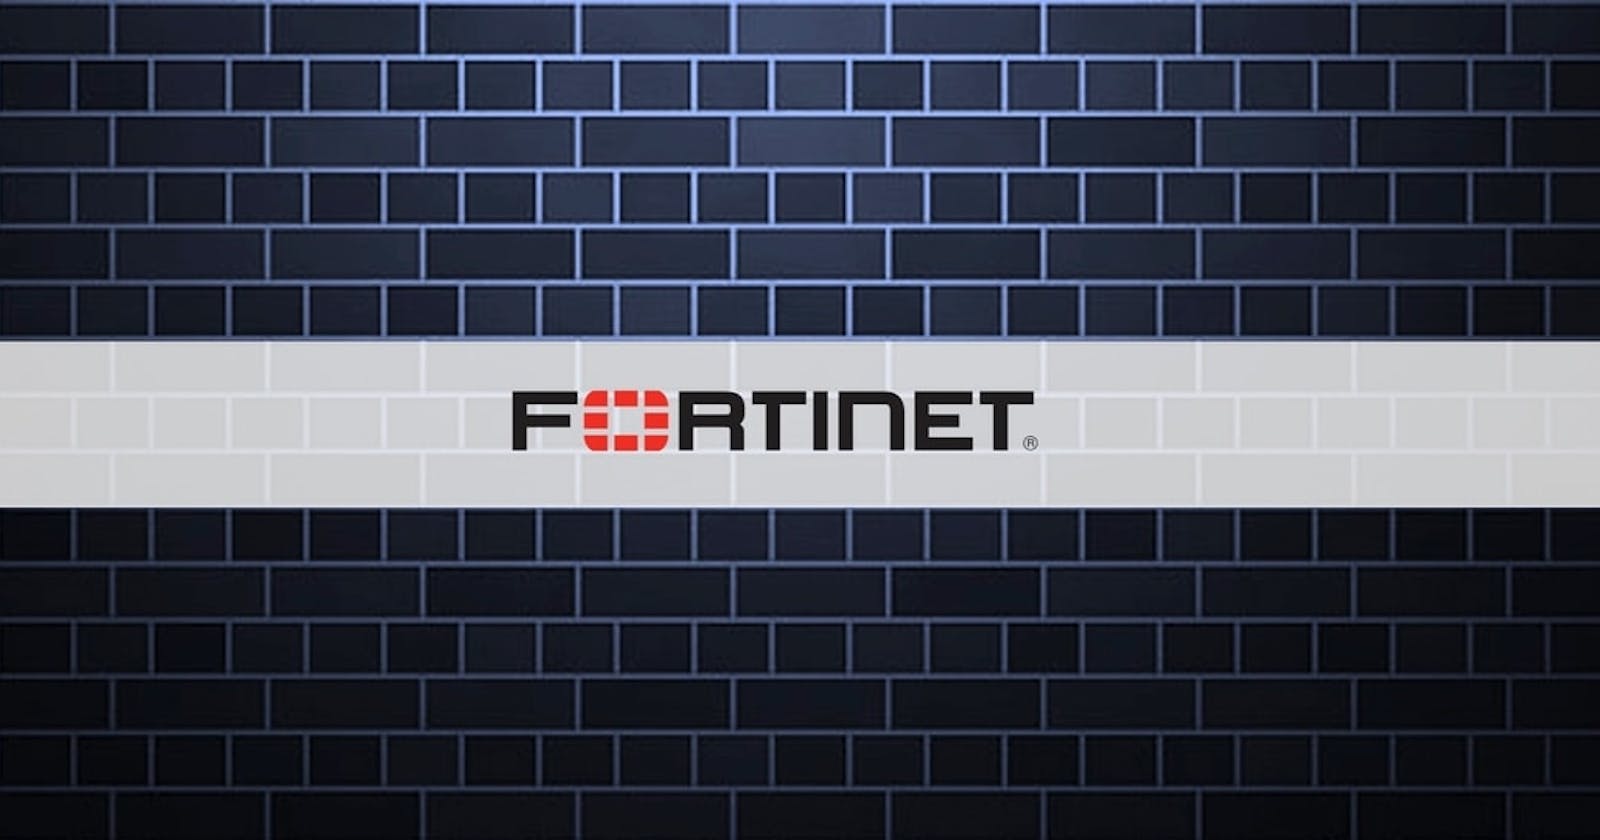 Fortinet Releases Security Updates to Address Critical Vulnerabilities in its Software Lineup